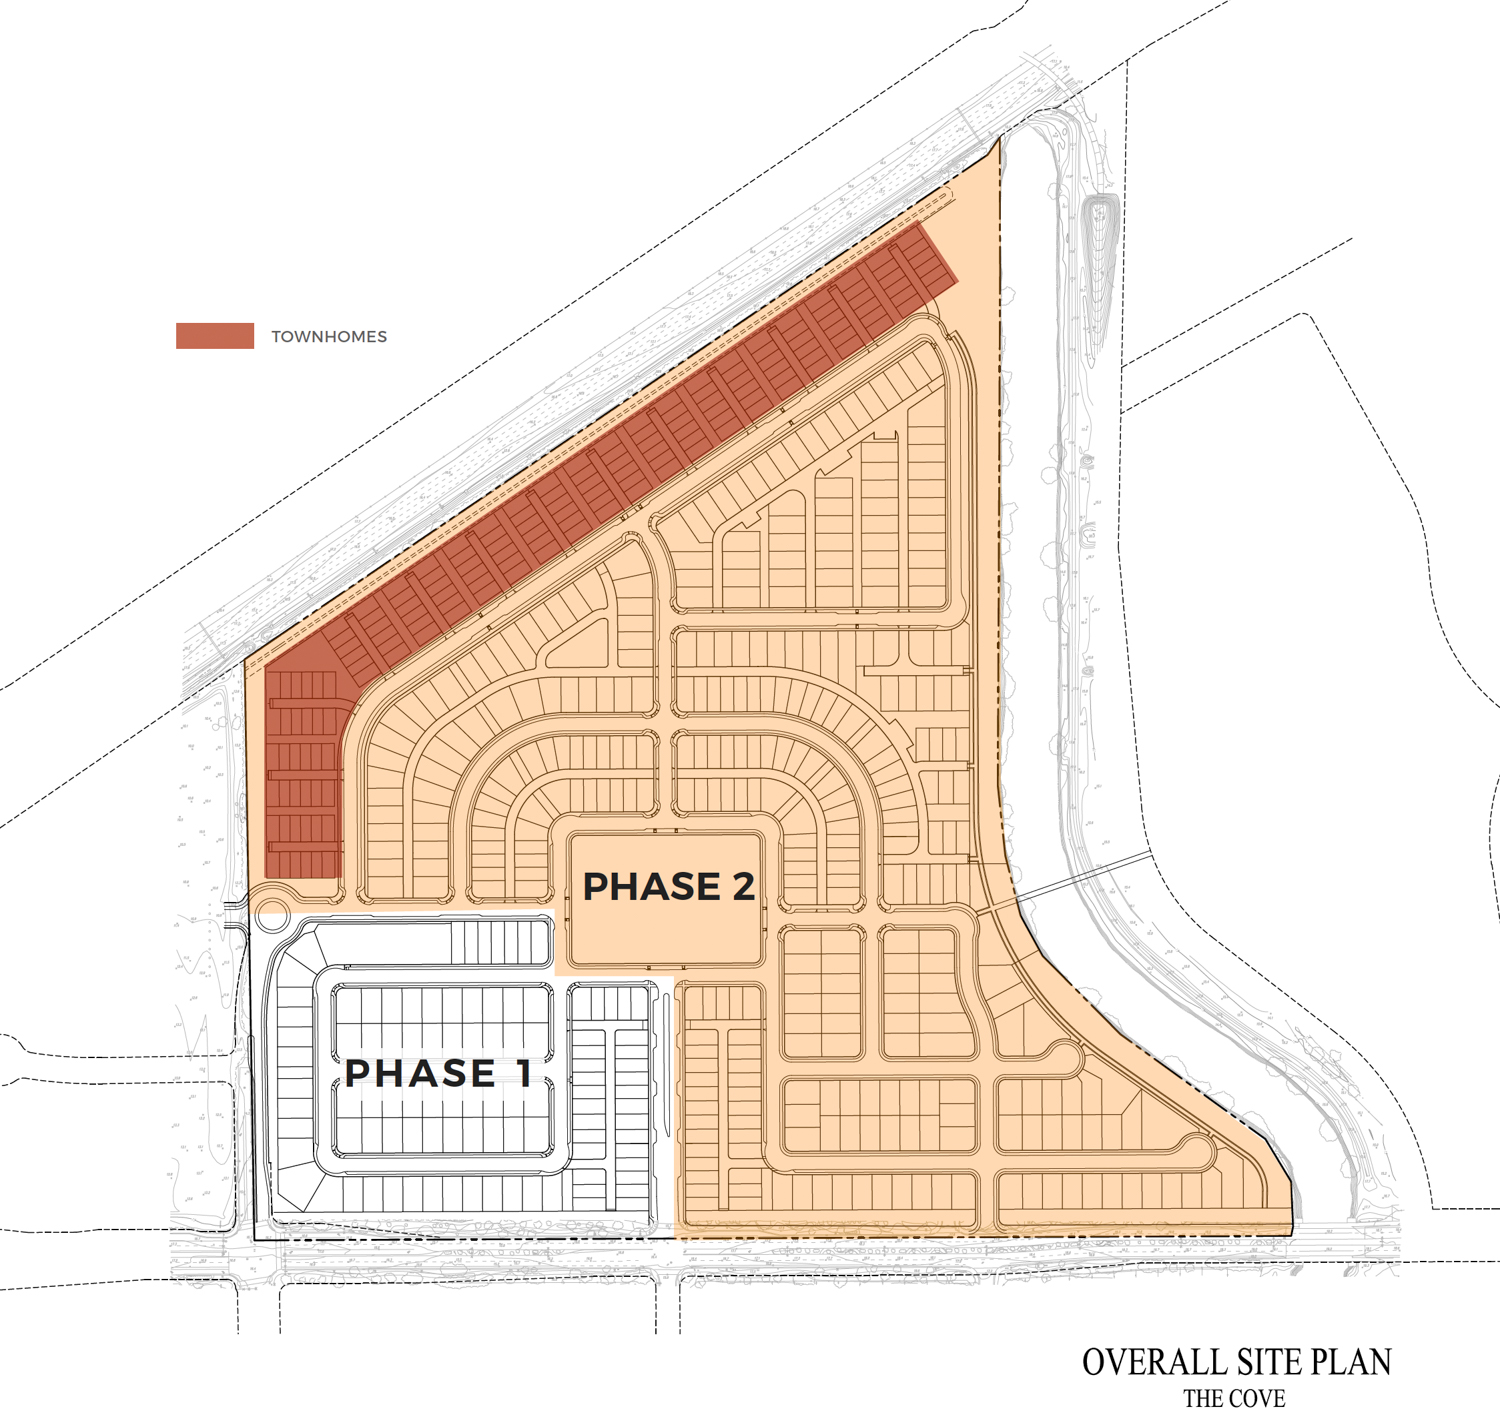 The Cove masterplan, with the Edgeview townhouses highlighted in darker orange